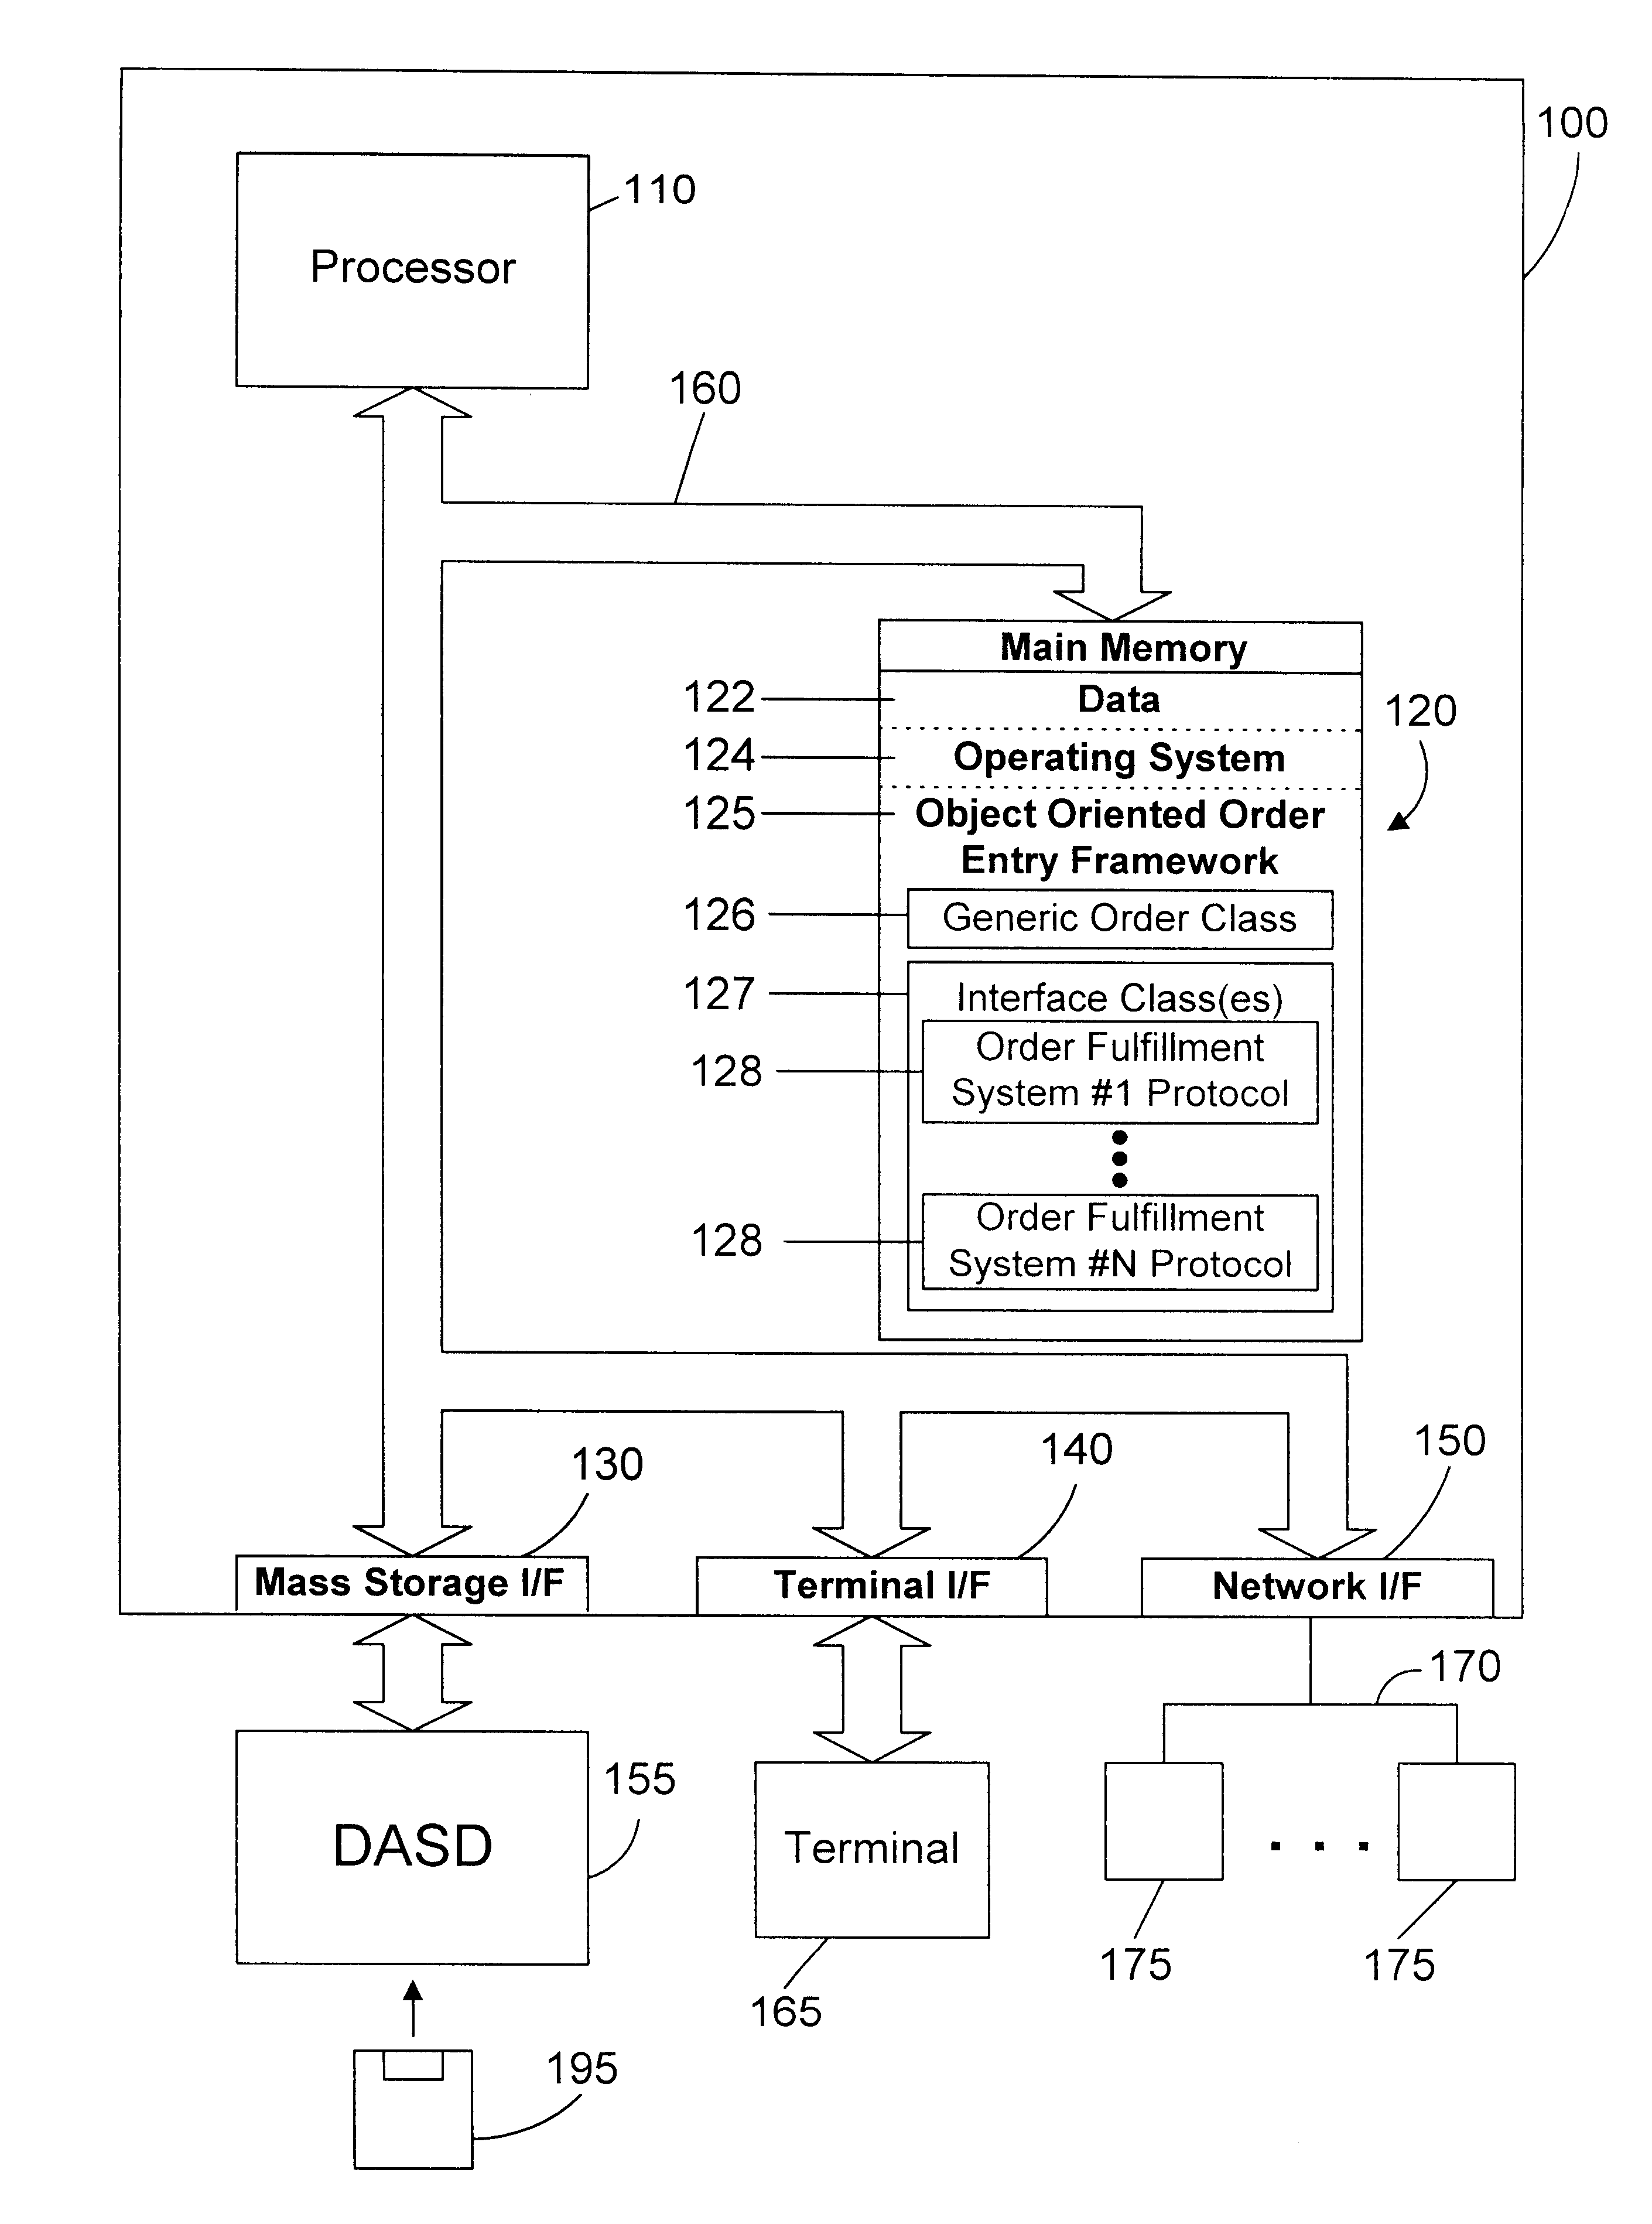 Object oriented framework mechanism and method for providing a generic order entry processing interface for one or more order fulfillment systems